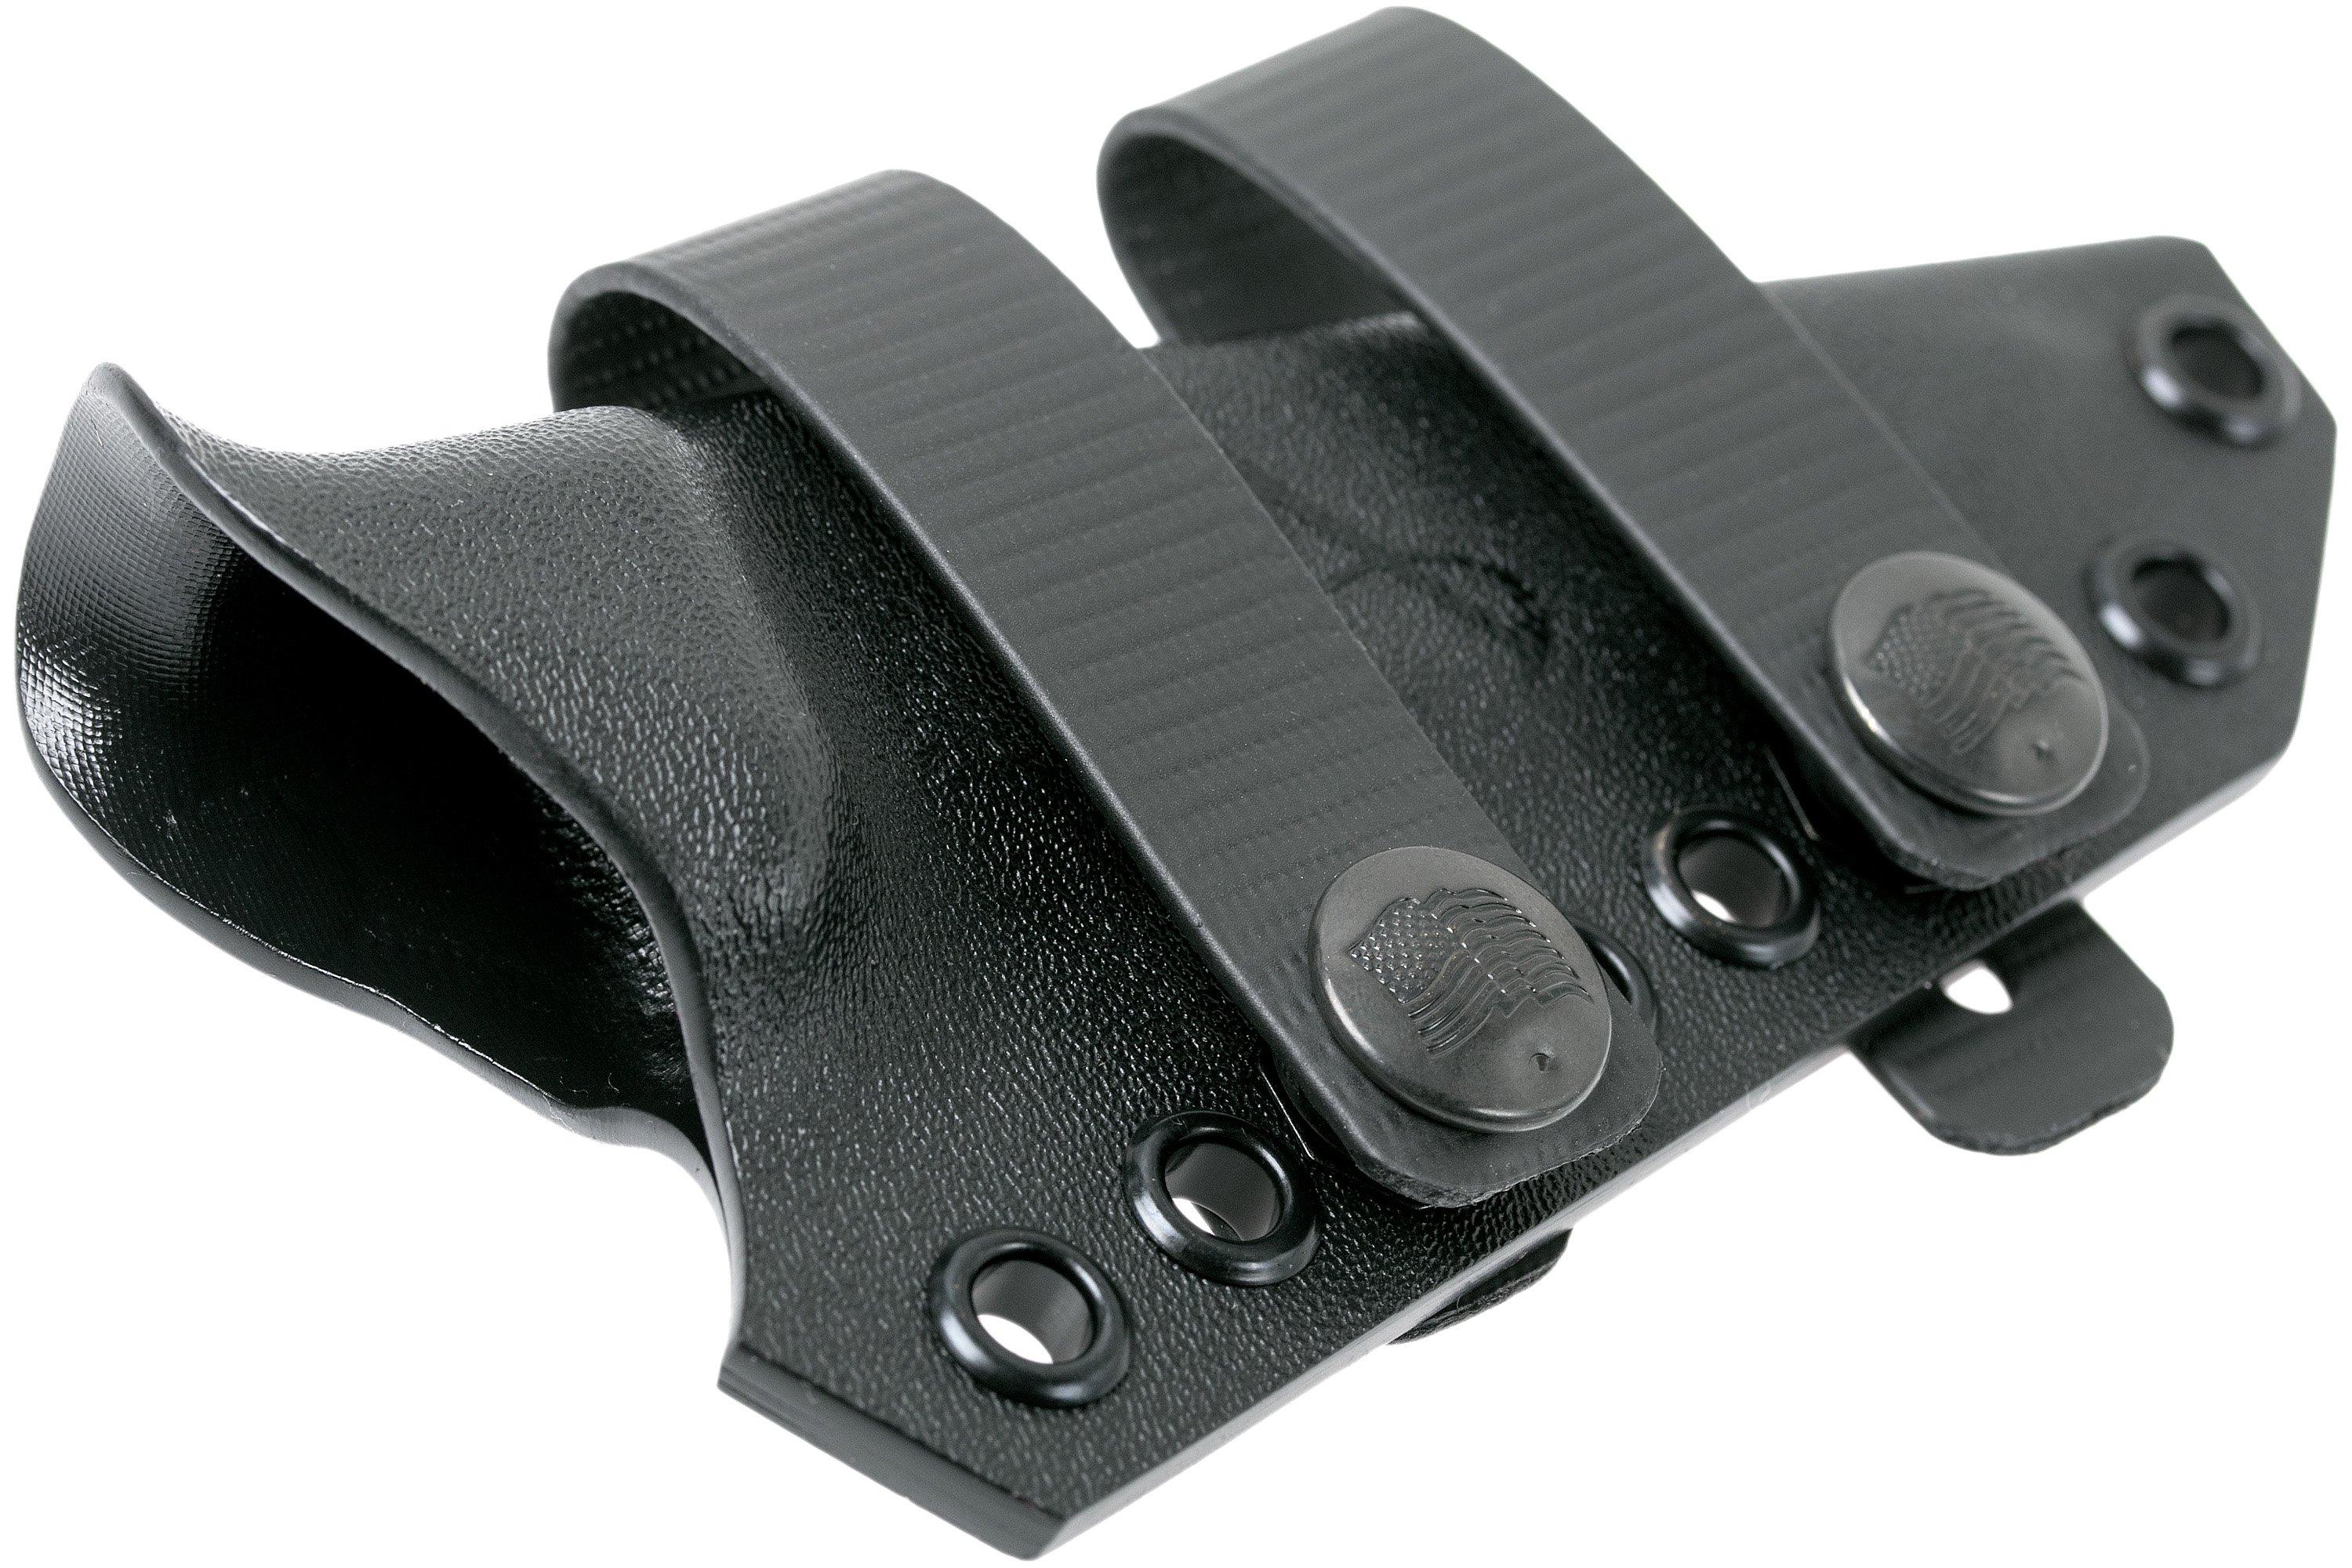 Armatus Carry Architect sheath for the ESEE RB3, black | Advantageously ...